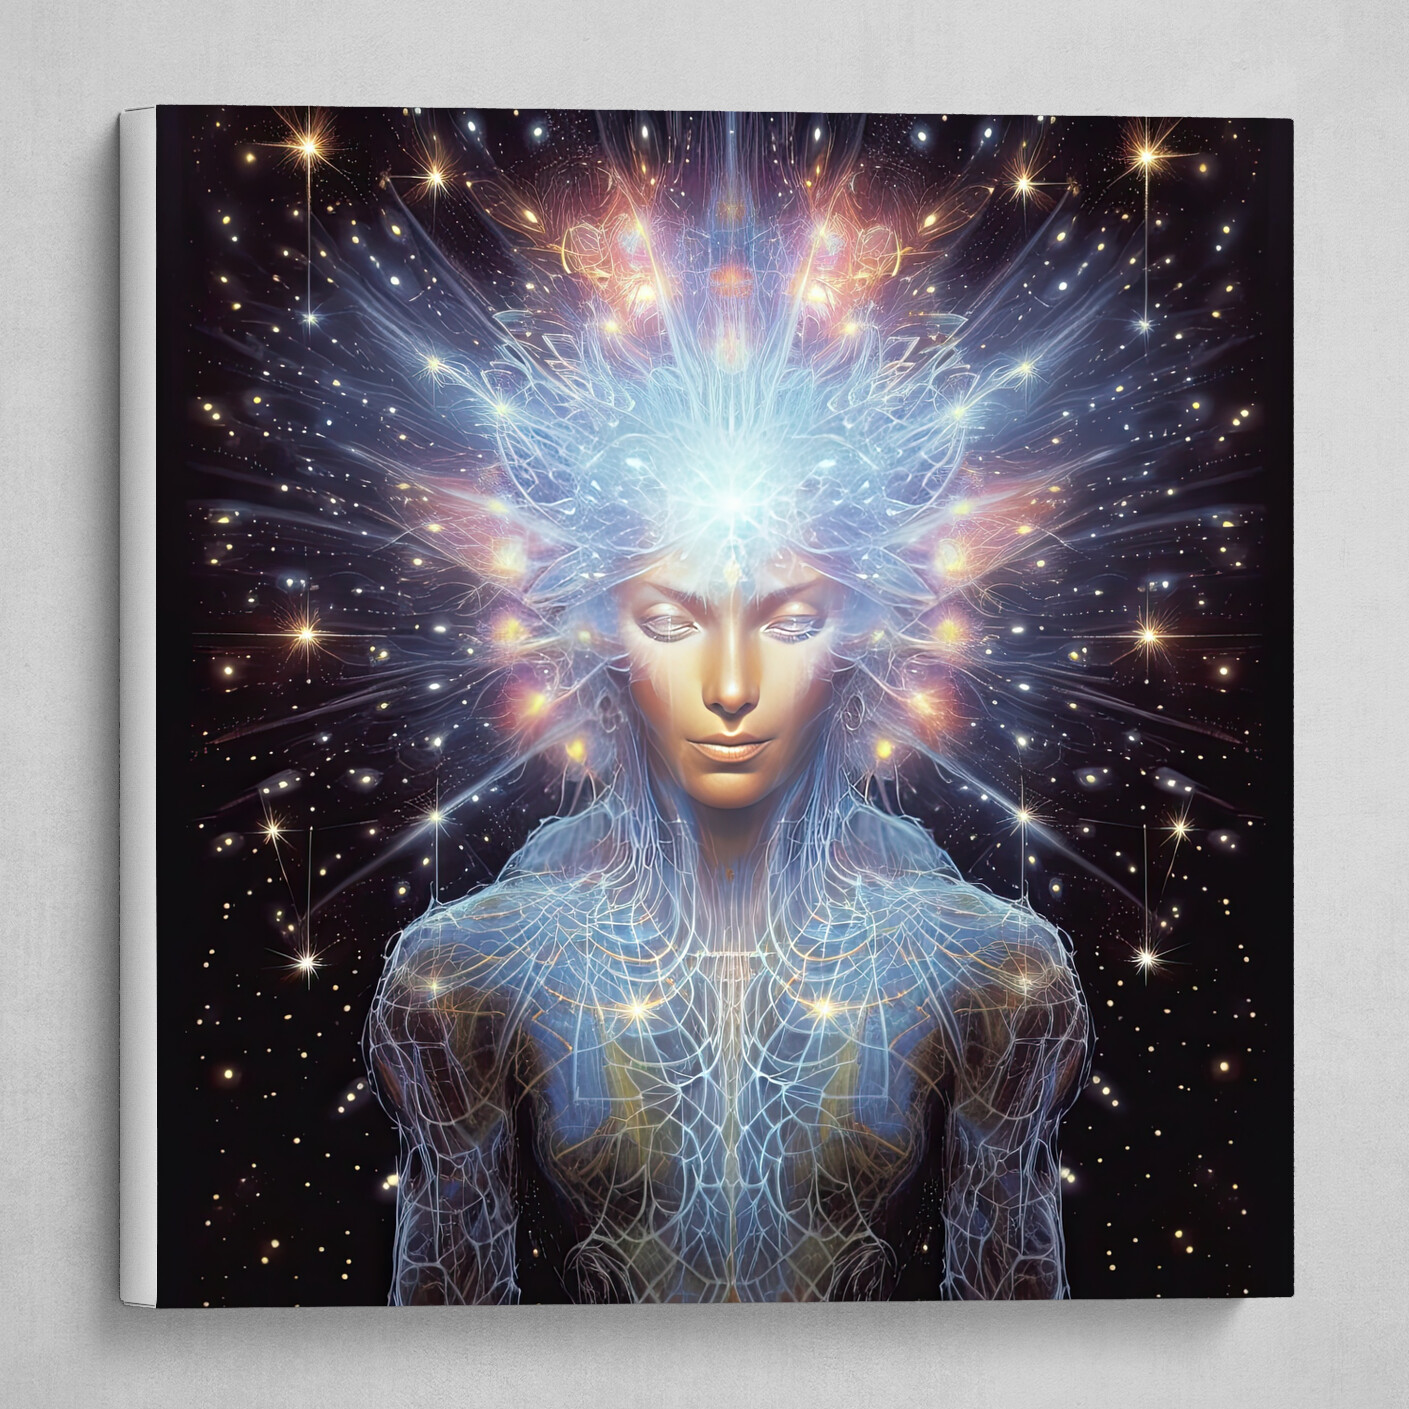 "Ethereal Illumination: Journey of the Celestial Being"